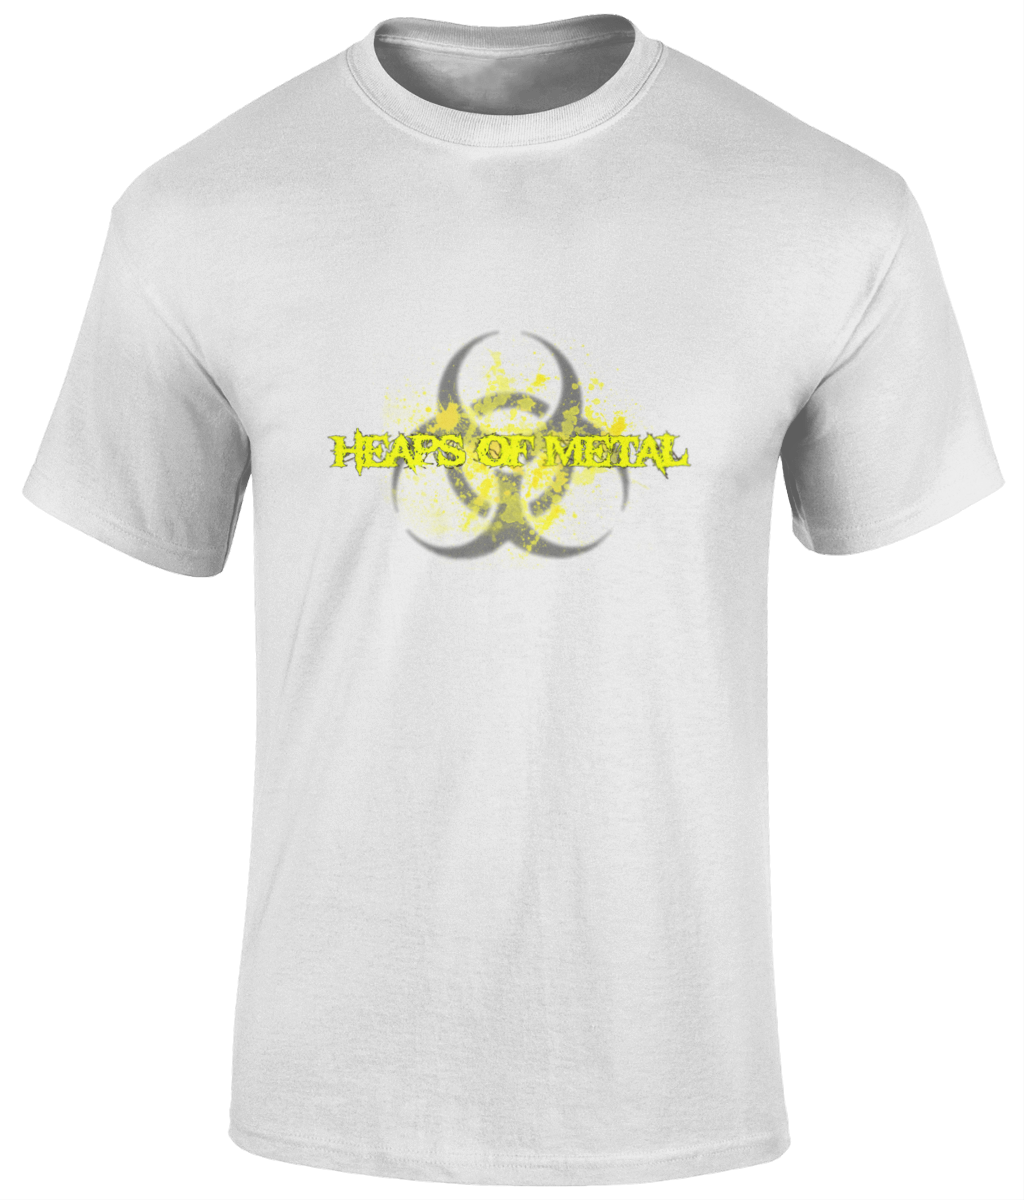 POISON VALLEY CLOTHING "HEAPS OF METAL BIOHAZARD YELLOW" unisex t shirt  Material: 100% cotton.  Seamless twin needle collar. Taped neck and shoulders. Tubular body. Twin needle sleeves and hem. Available in Black or White Sizes small to 5XL